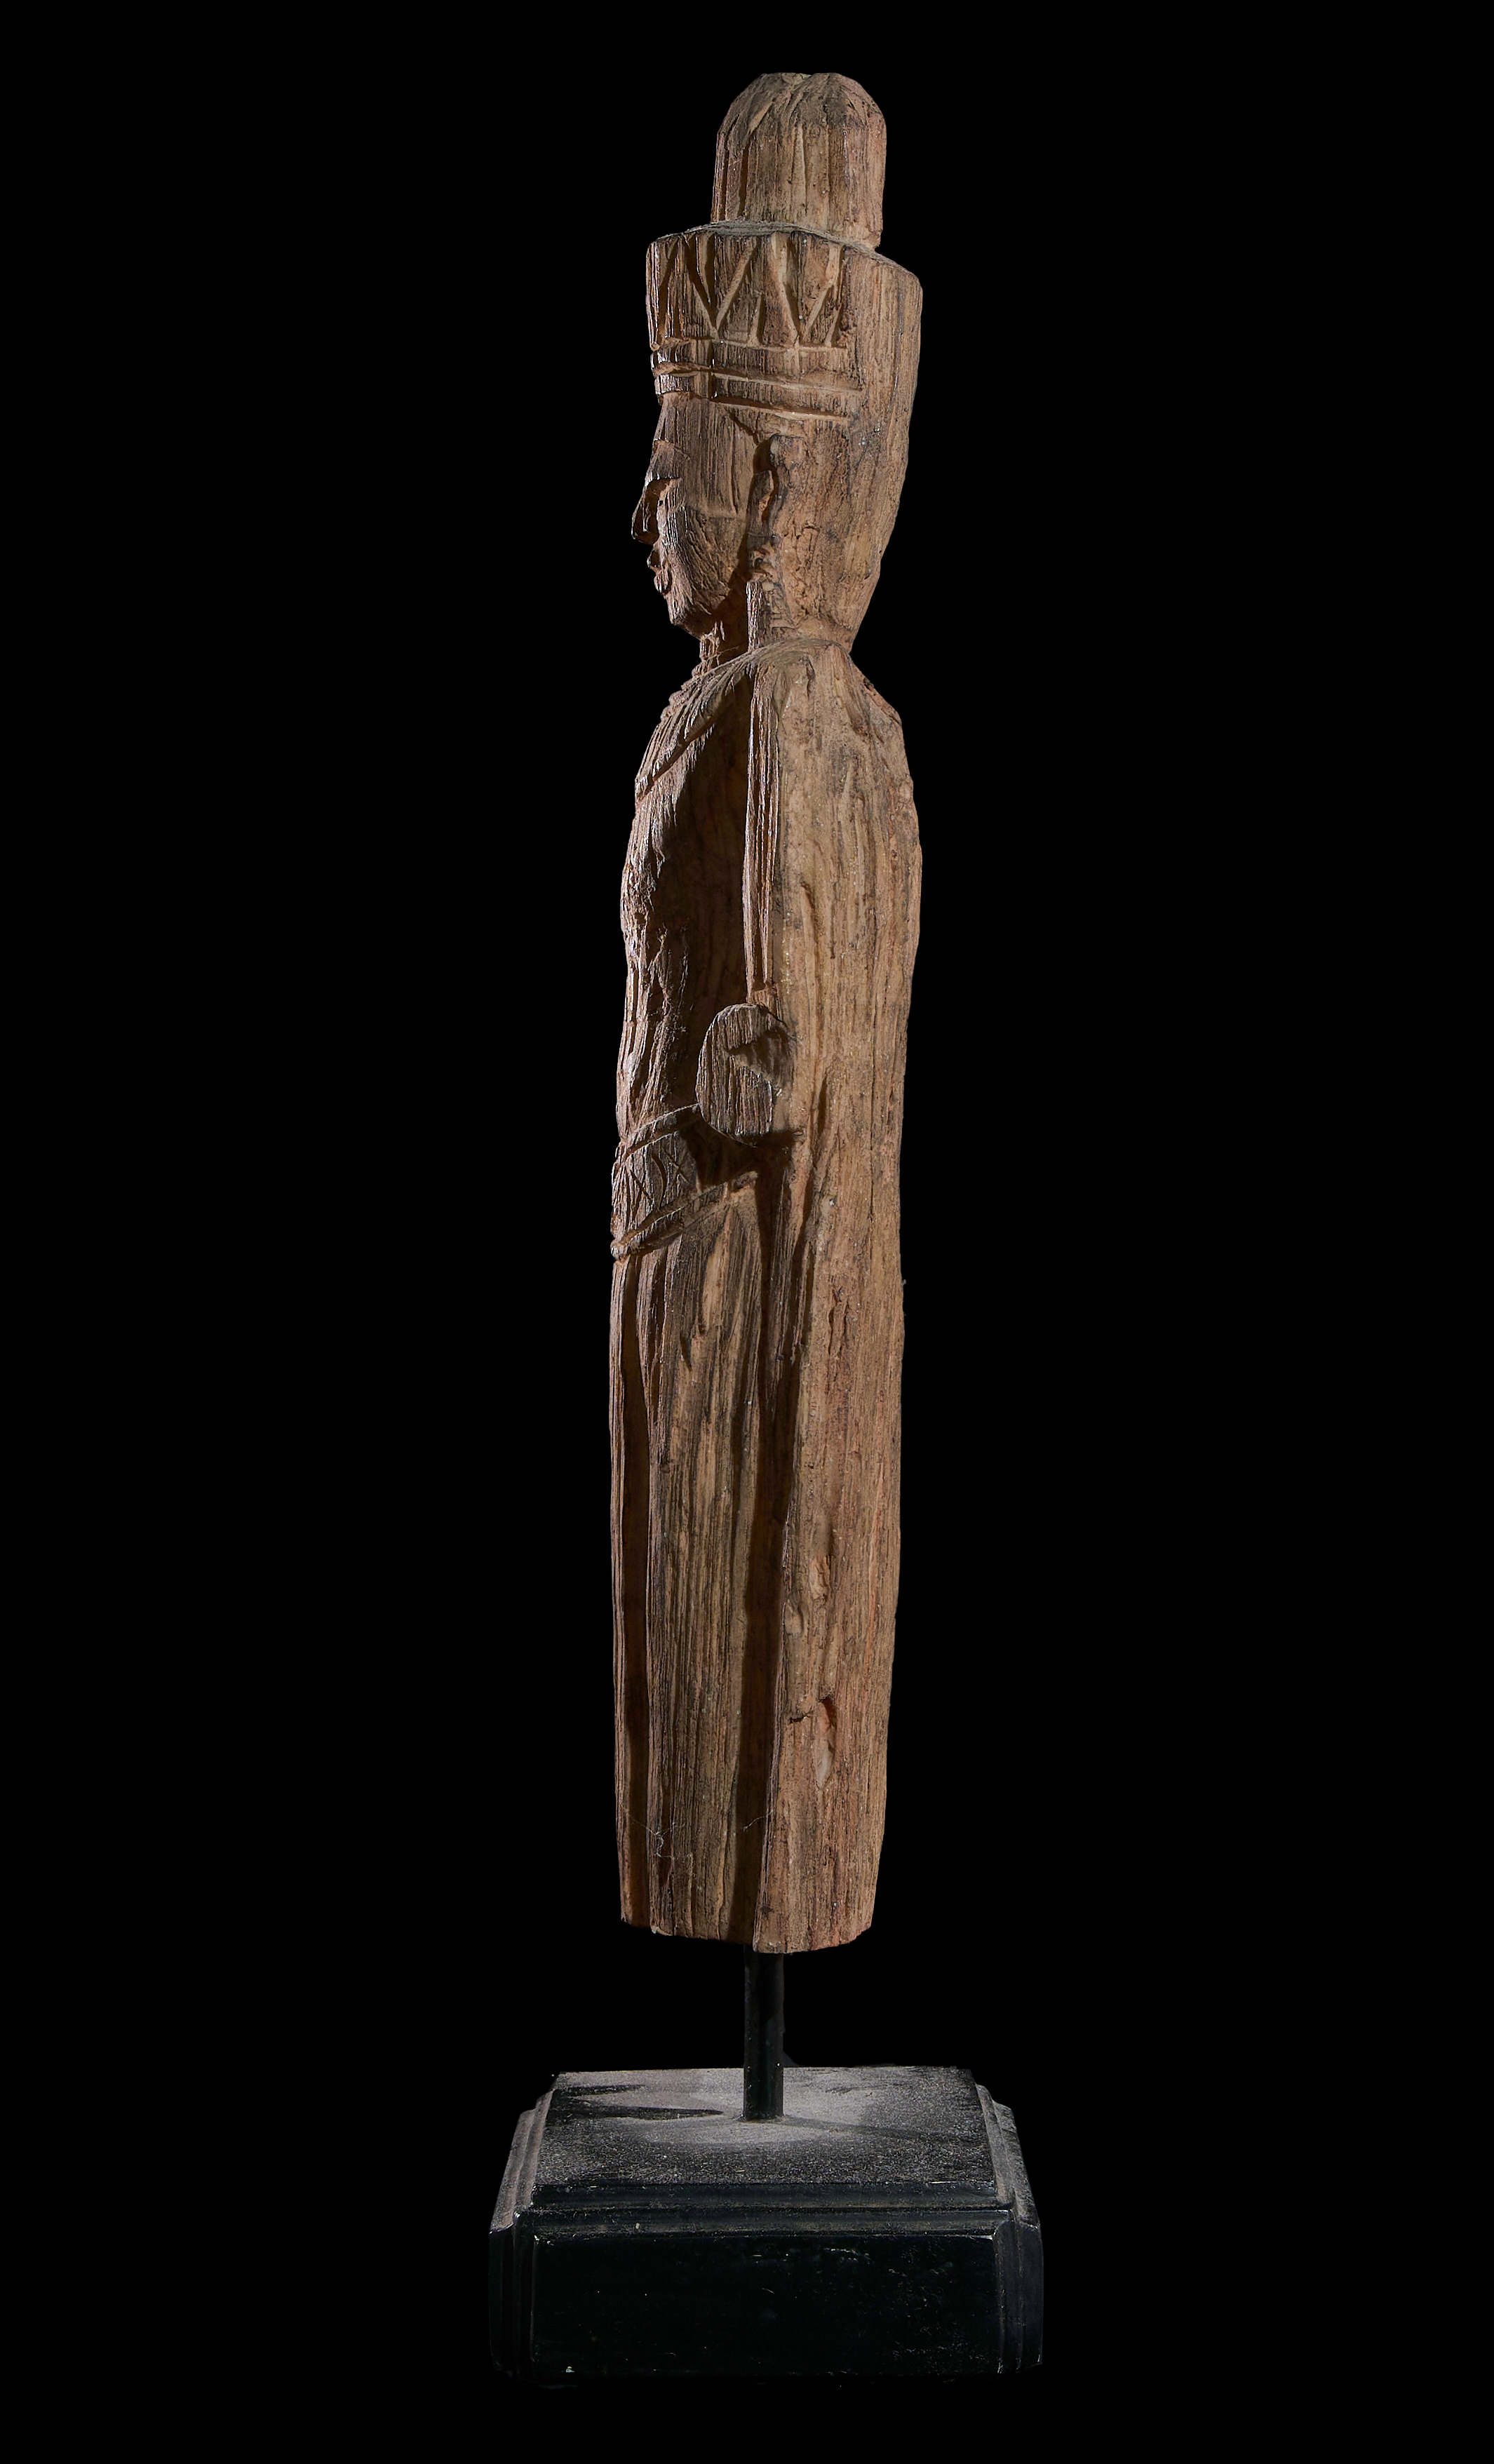 A CARVED KHMER WOODEN FIGURE, PROBABLY 13TH CENTURY - Image 3 of 4